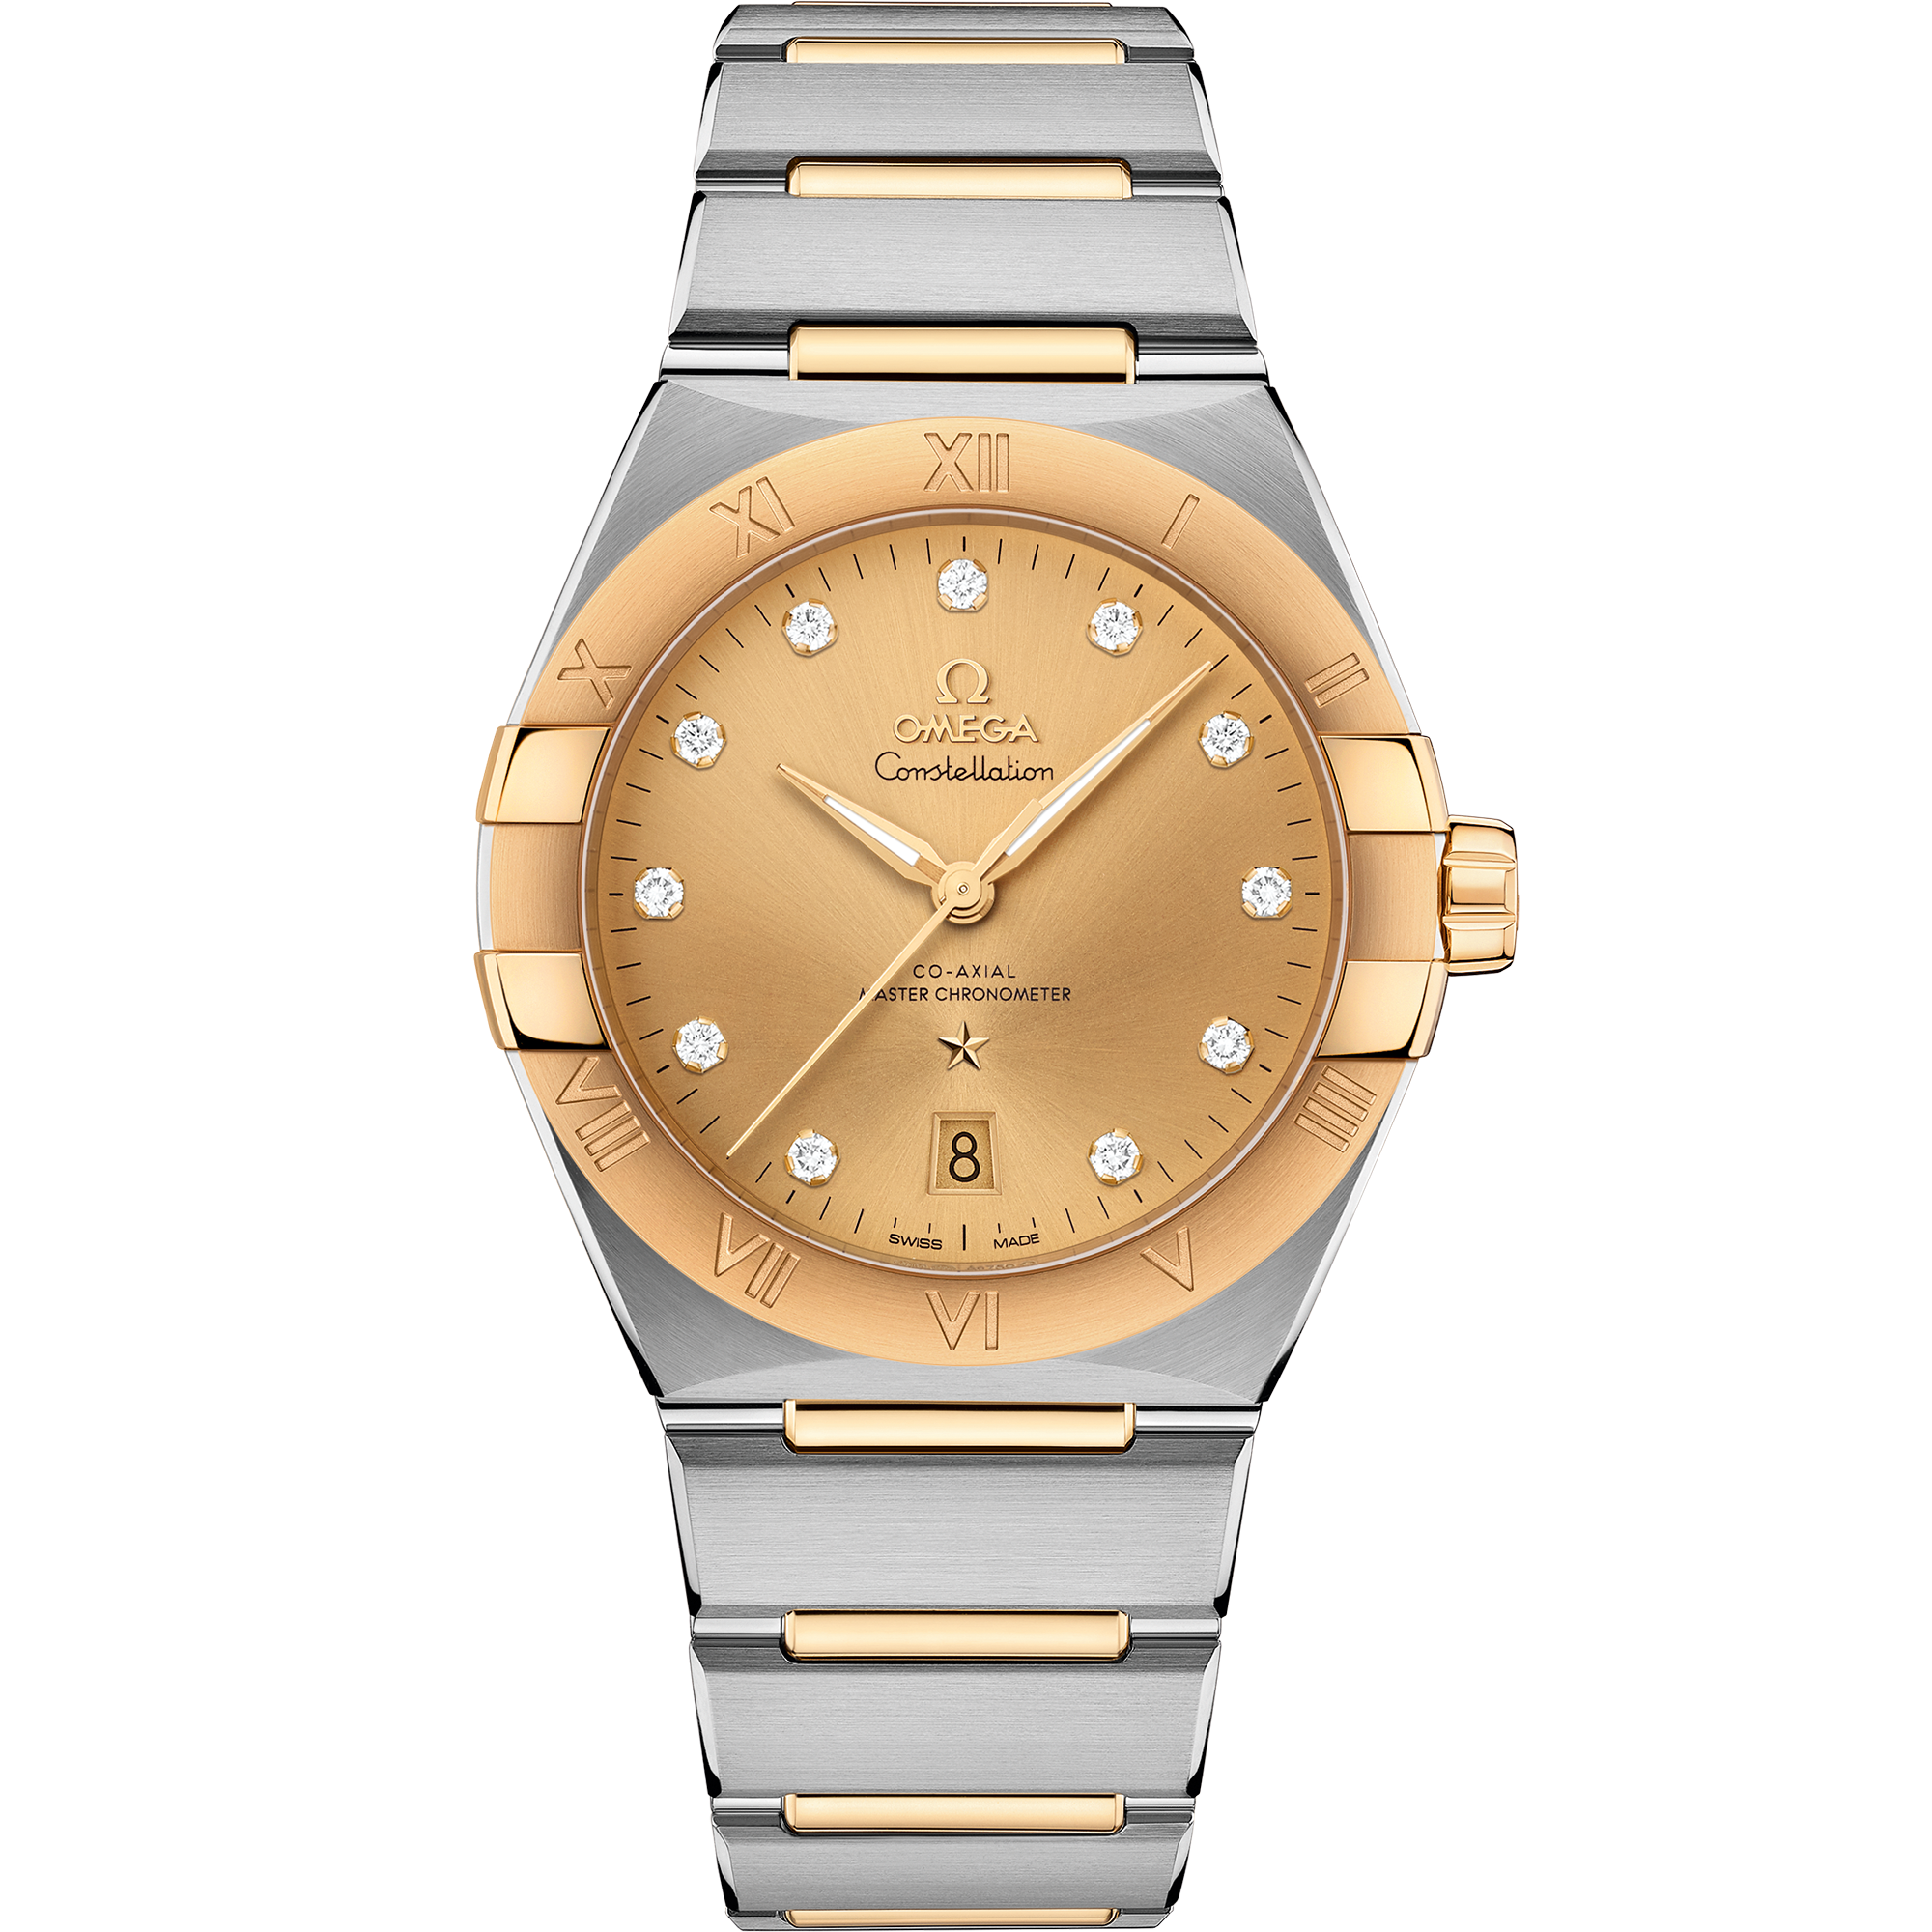 Omega Constellation Review: Is It a Good Investment?